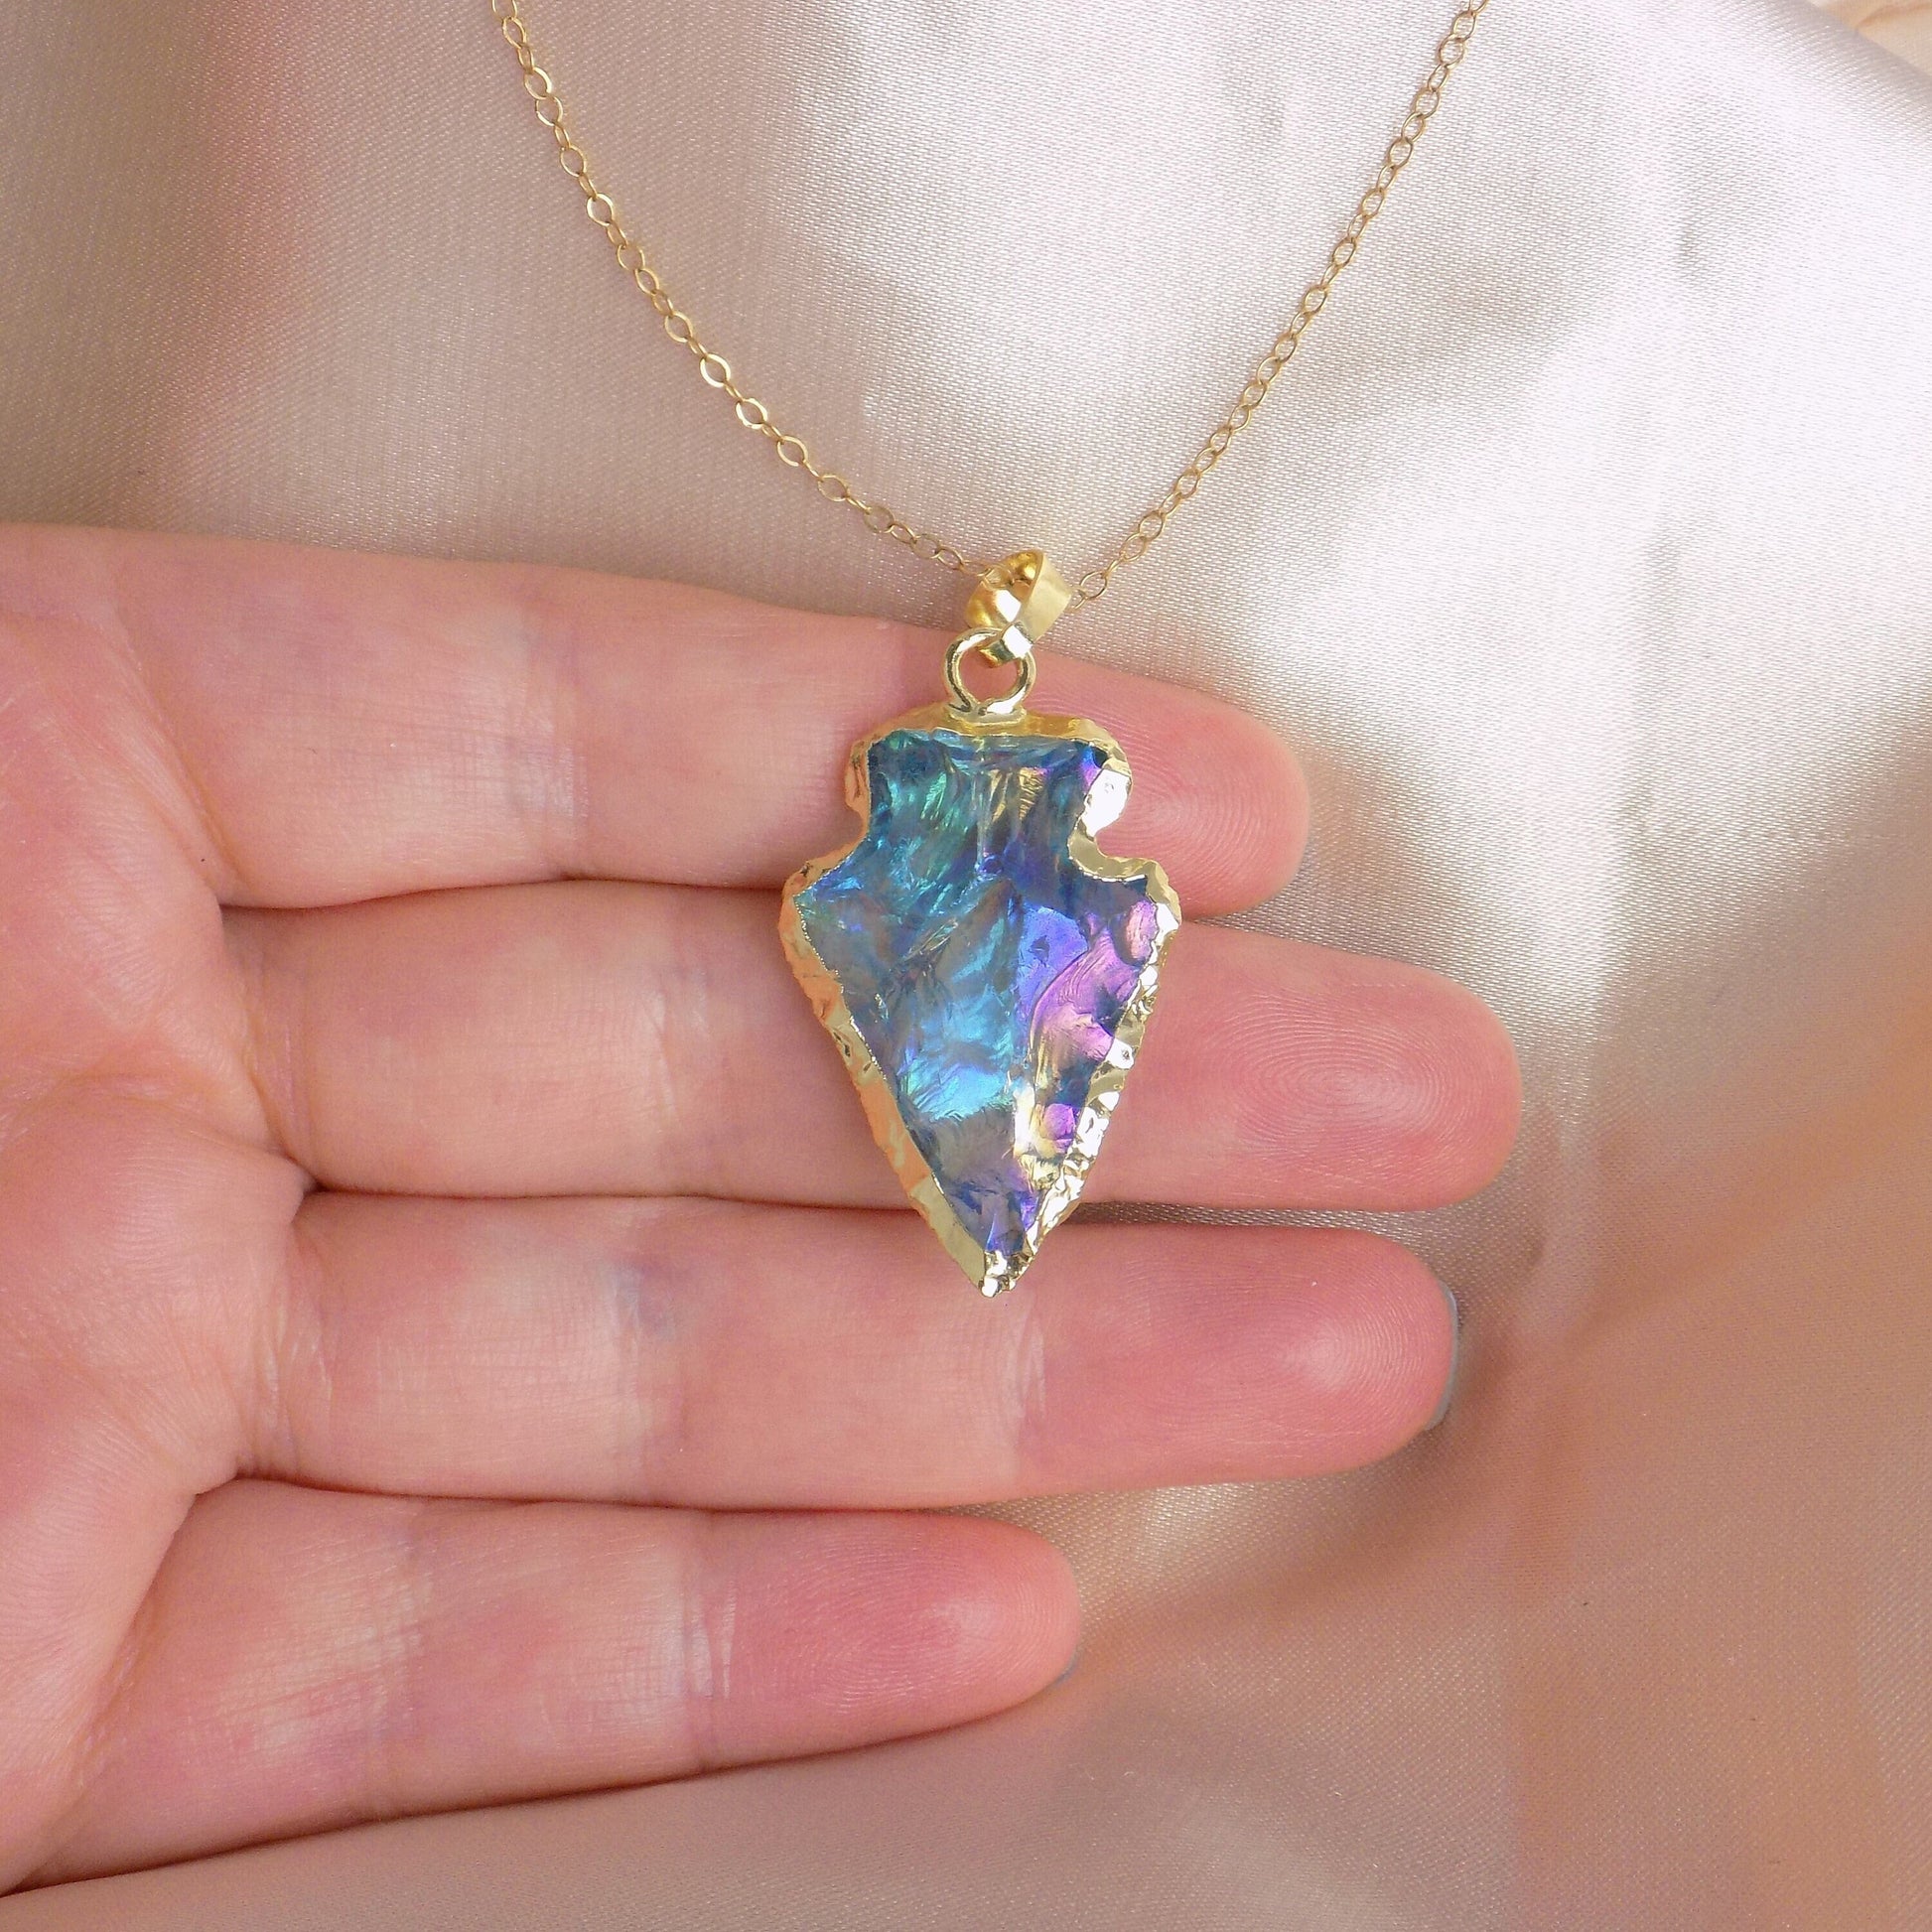 Turquoise Aura Quartz Arrowhead Necklace Gold, Unique Iridescent Crystal Jewelry Boho, Gift For Her, M7-04